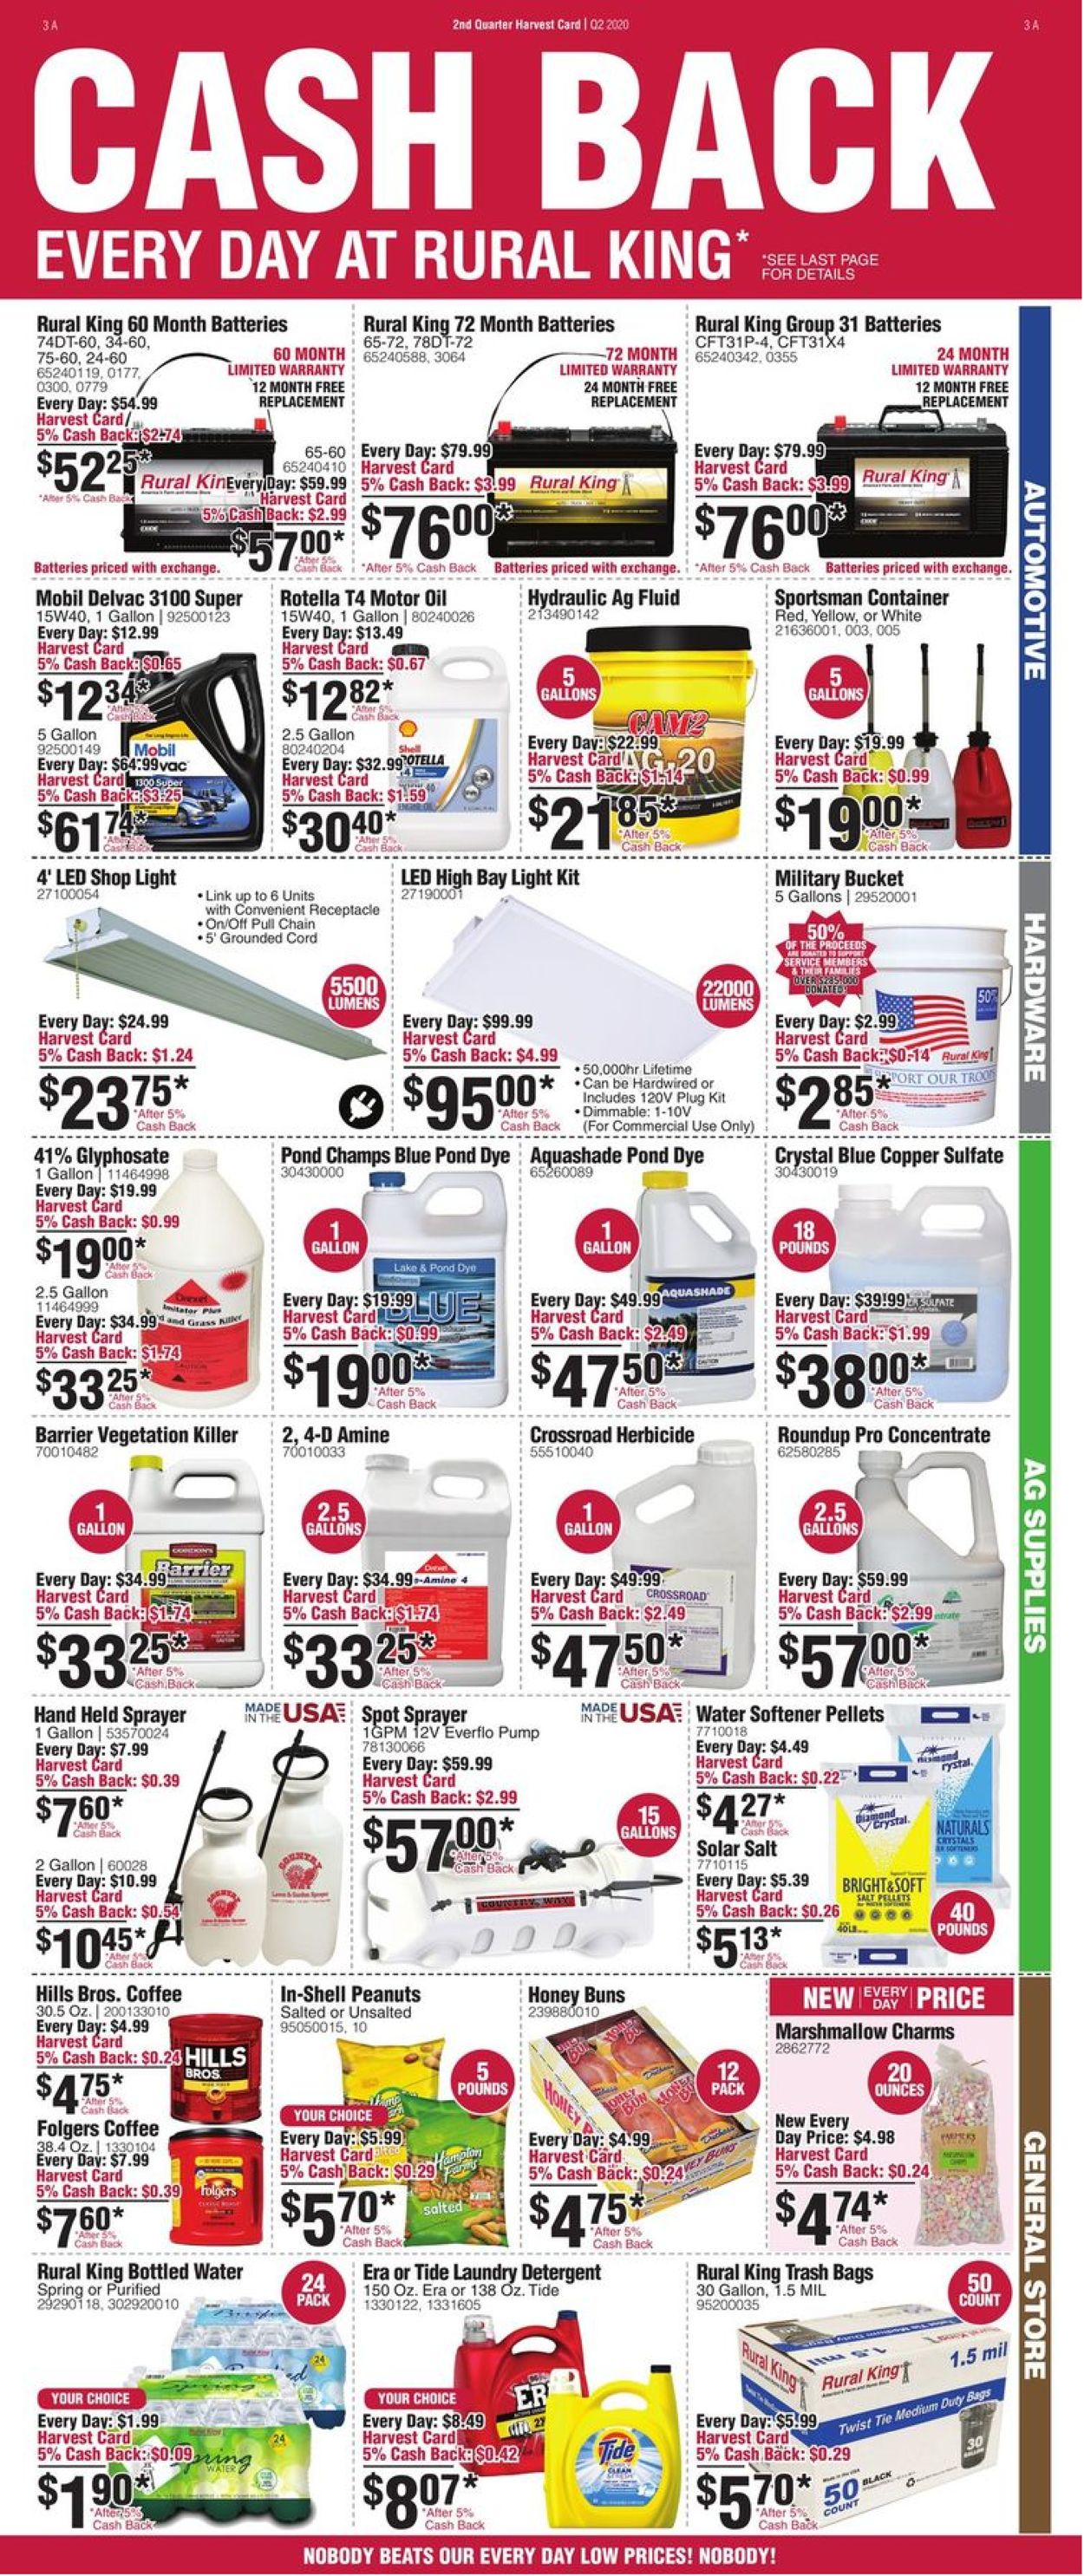 Rural King Current weekly ad 05/22 06/30/2020 [3]